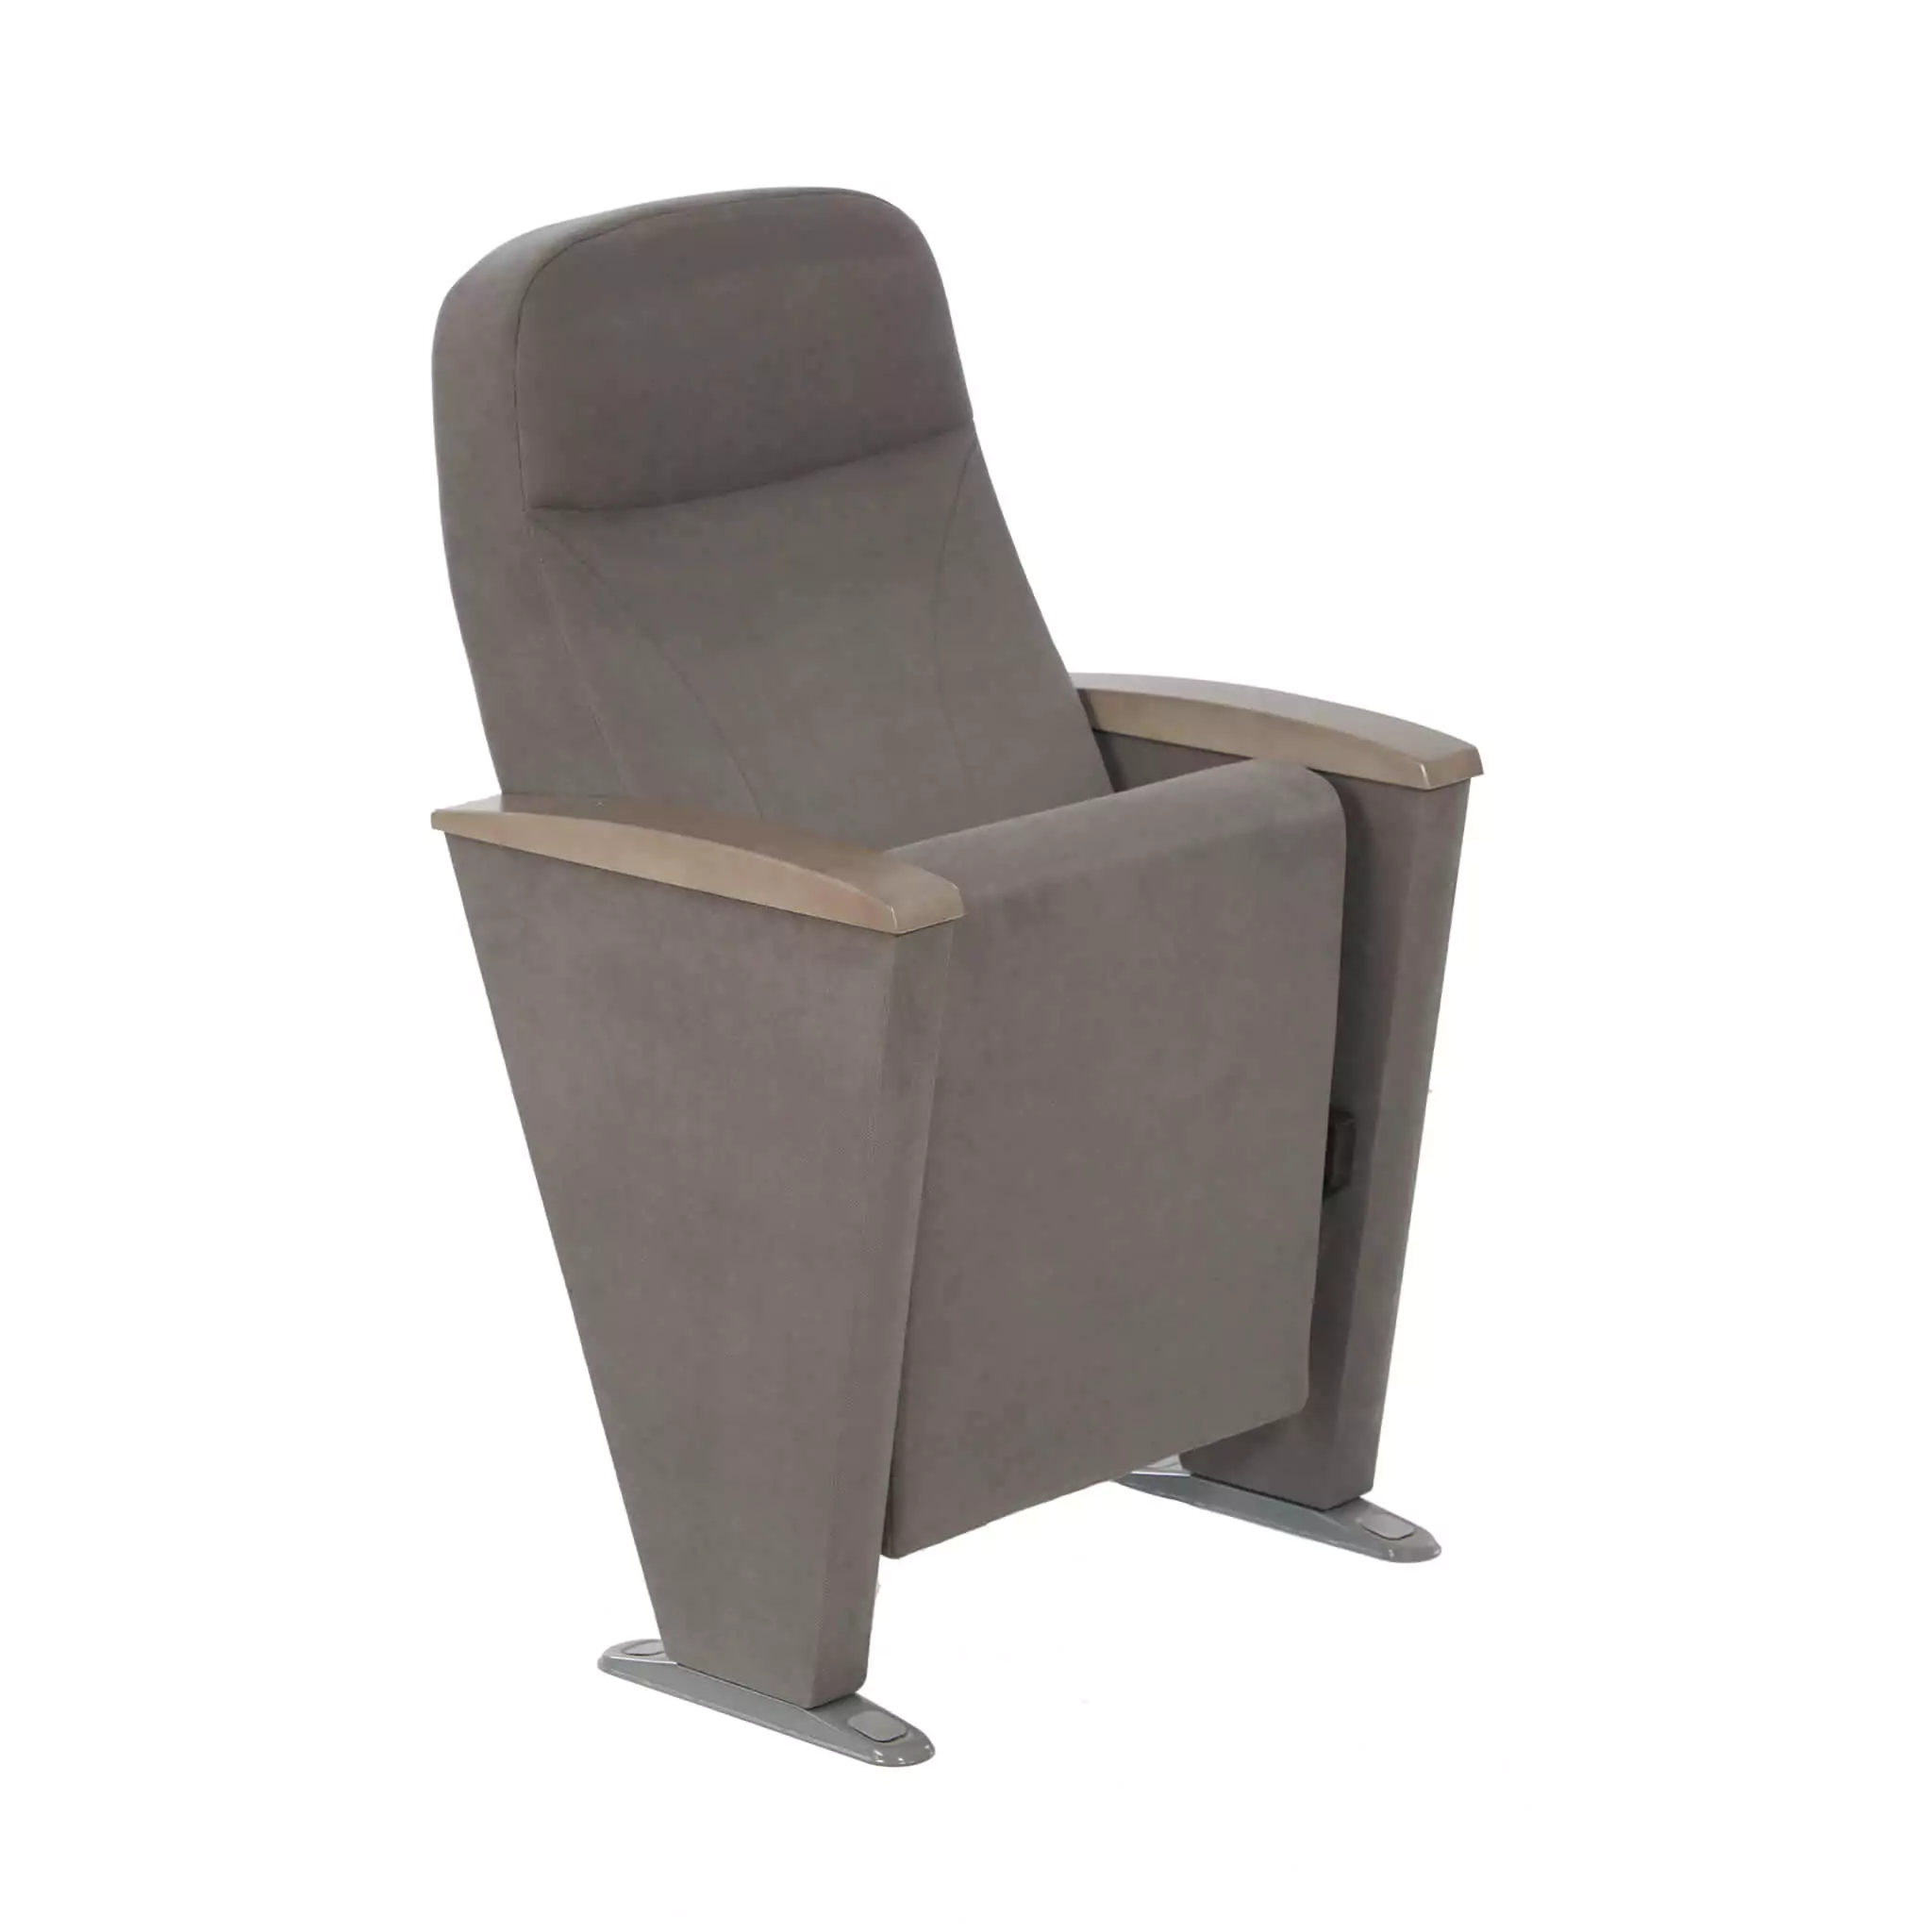 Simko Seating Product Conference Seat Suare V